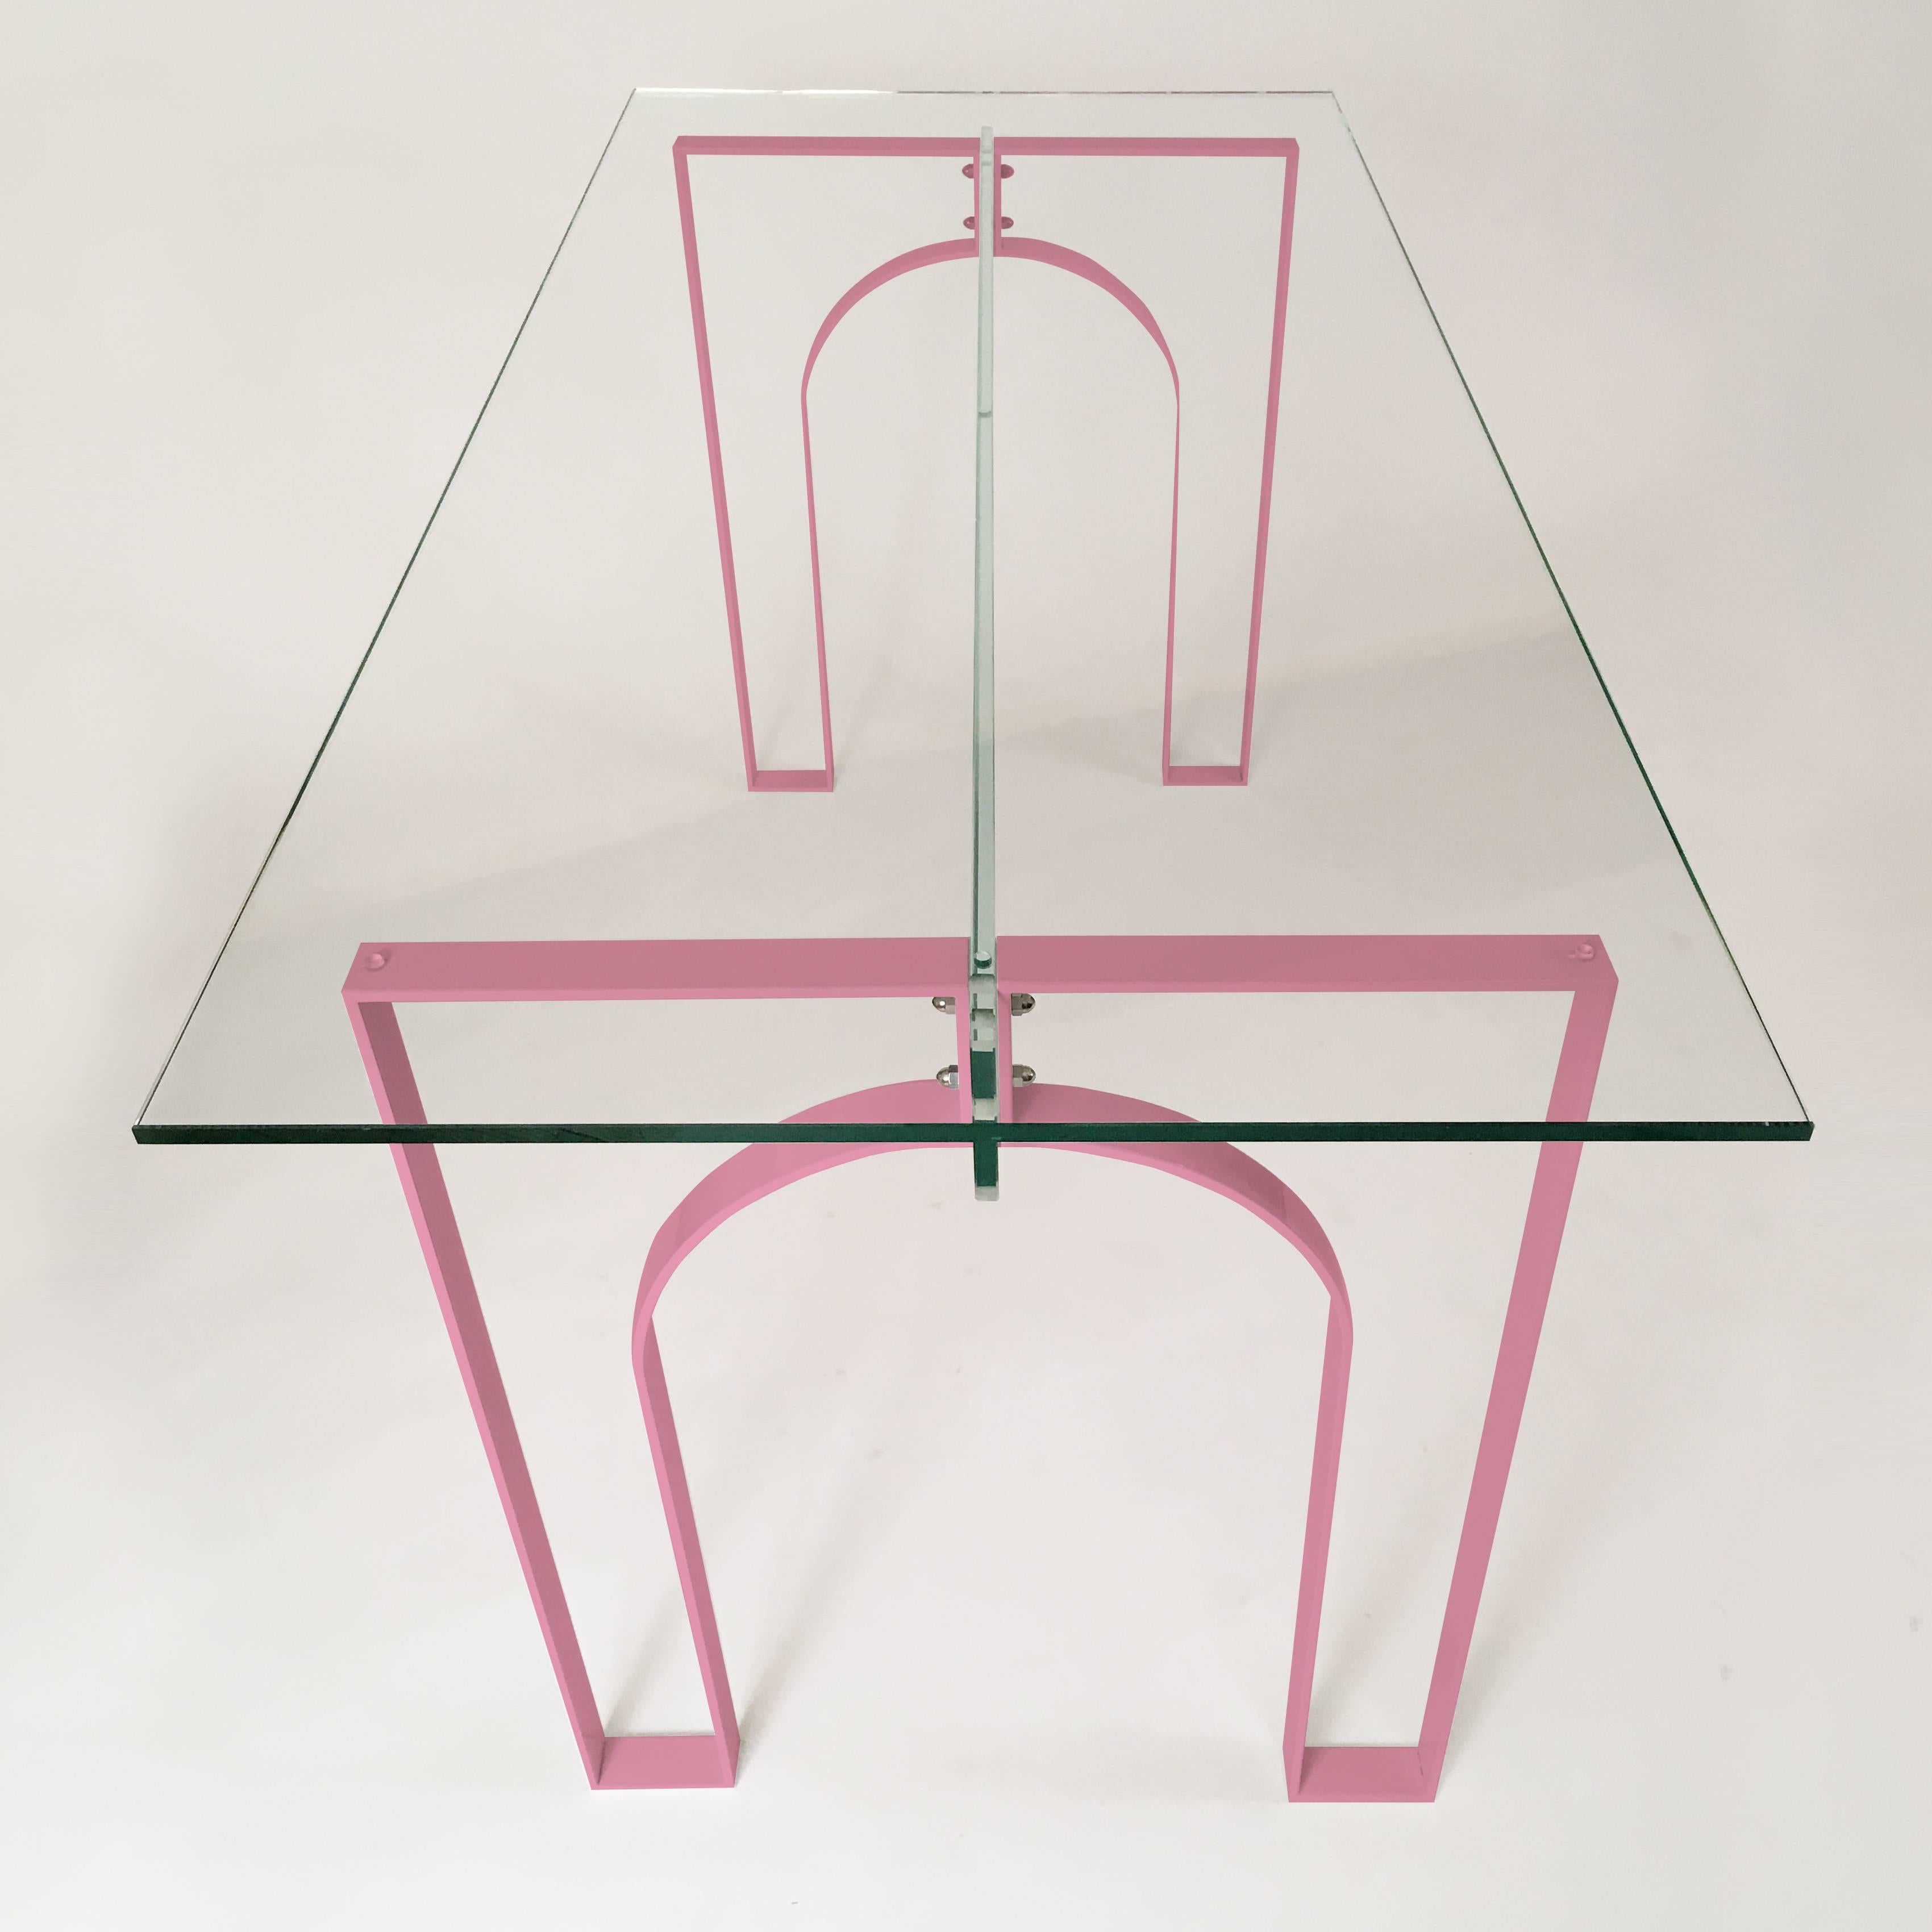 Minimal and modern, this desk shows that simple is beautiful. It is constructed of custom bent steel legs that form arches on either end and a glass connecting beam across the middle. The legs are powder-coated and can be provided in any RAL color